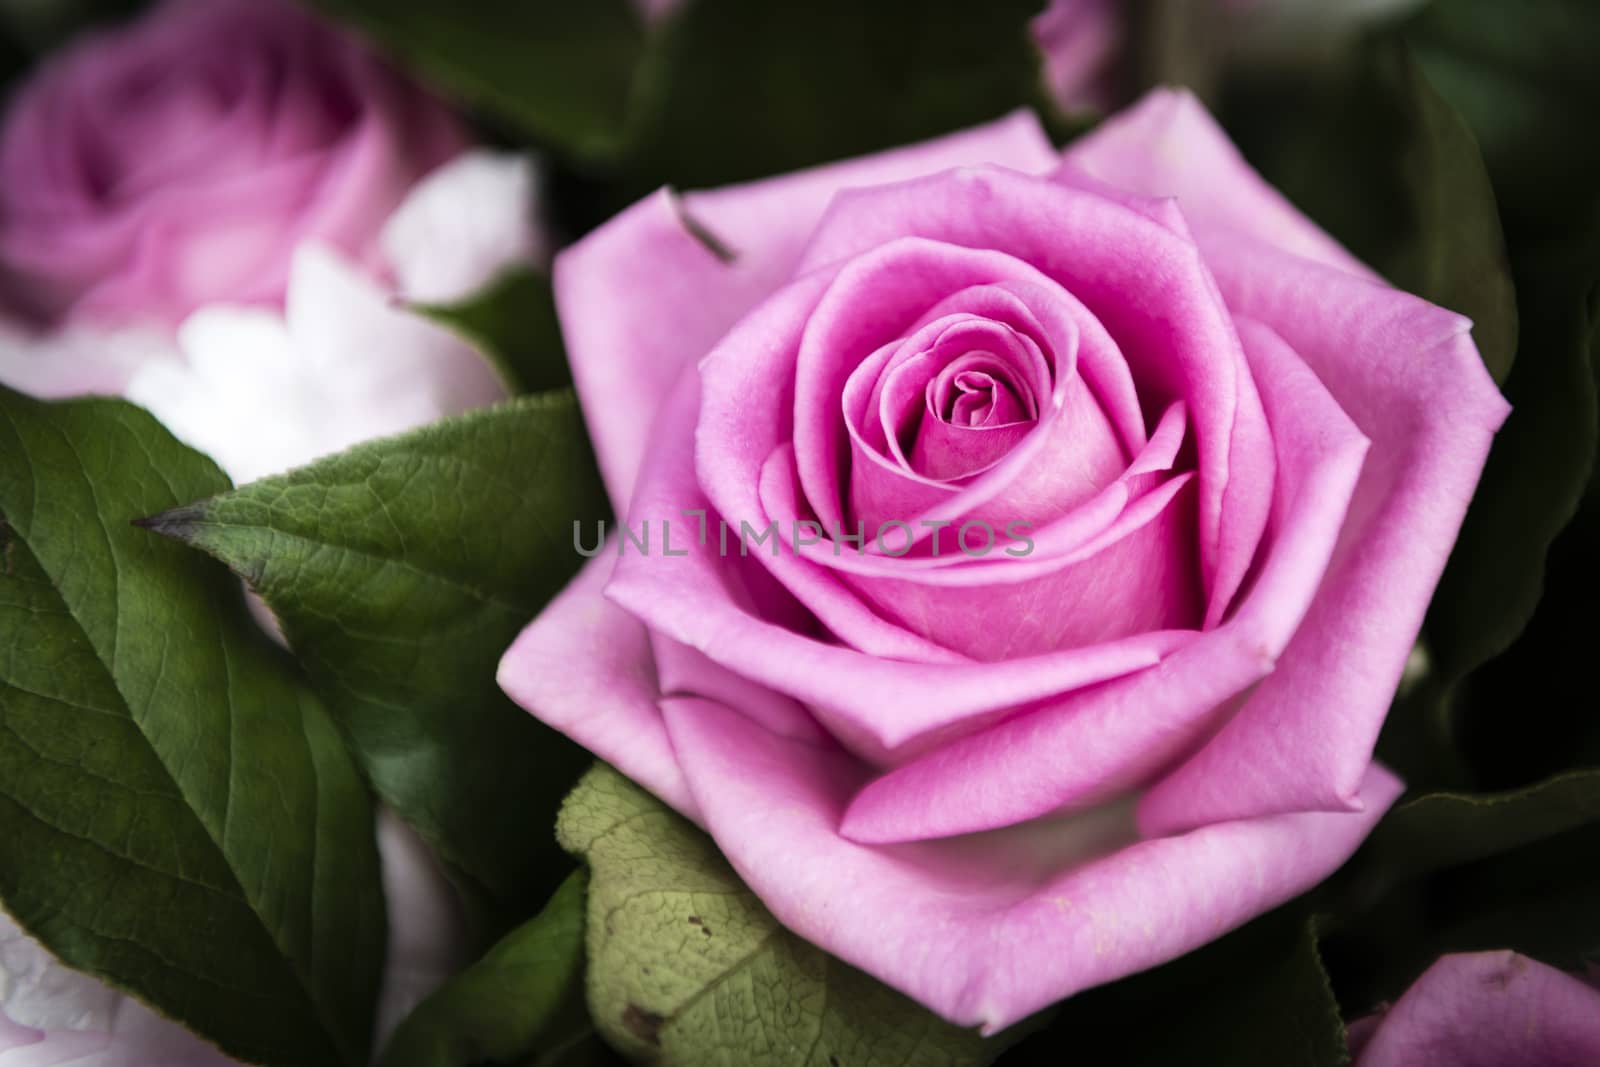 Beautiful pink Rose flower in the garden, a perfect gift for all occasions.

Photographed using Nikon D800E (36 megapixels) DSLR with AF-S NIKKOR 24-70 mm f/2.8G ED lens at focal length 70 mm, ISO 160, and exposure 1/500 sec at f/2.8.







Beautiful pink Rose flower in the garden, a perfect gift for all occasions.

Photographed using Nikon D800E (36 megapixels) DSLR with AF-S NIKKOR 24-70 mm f/2.8G ED lens at focal length 70 mm, ISO 160, and exposure 1/500 sec at f/2.8.